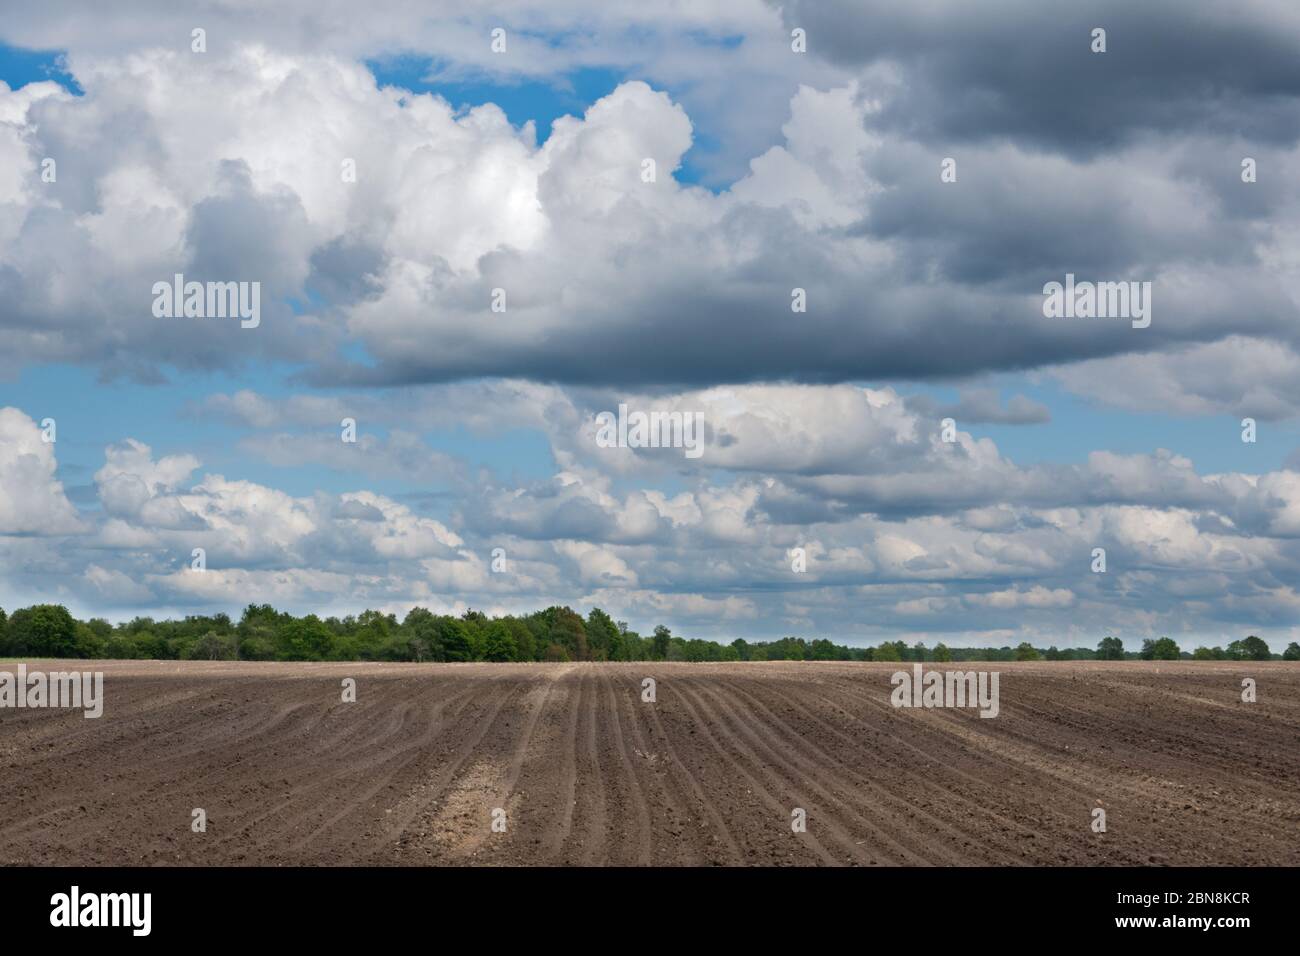 Agricultural landscape: pattern of ridges and furrows in a humic sandy field prepared for cultivation of potatoes under a blue sky with clouds Stock Photo